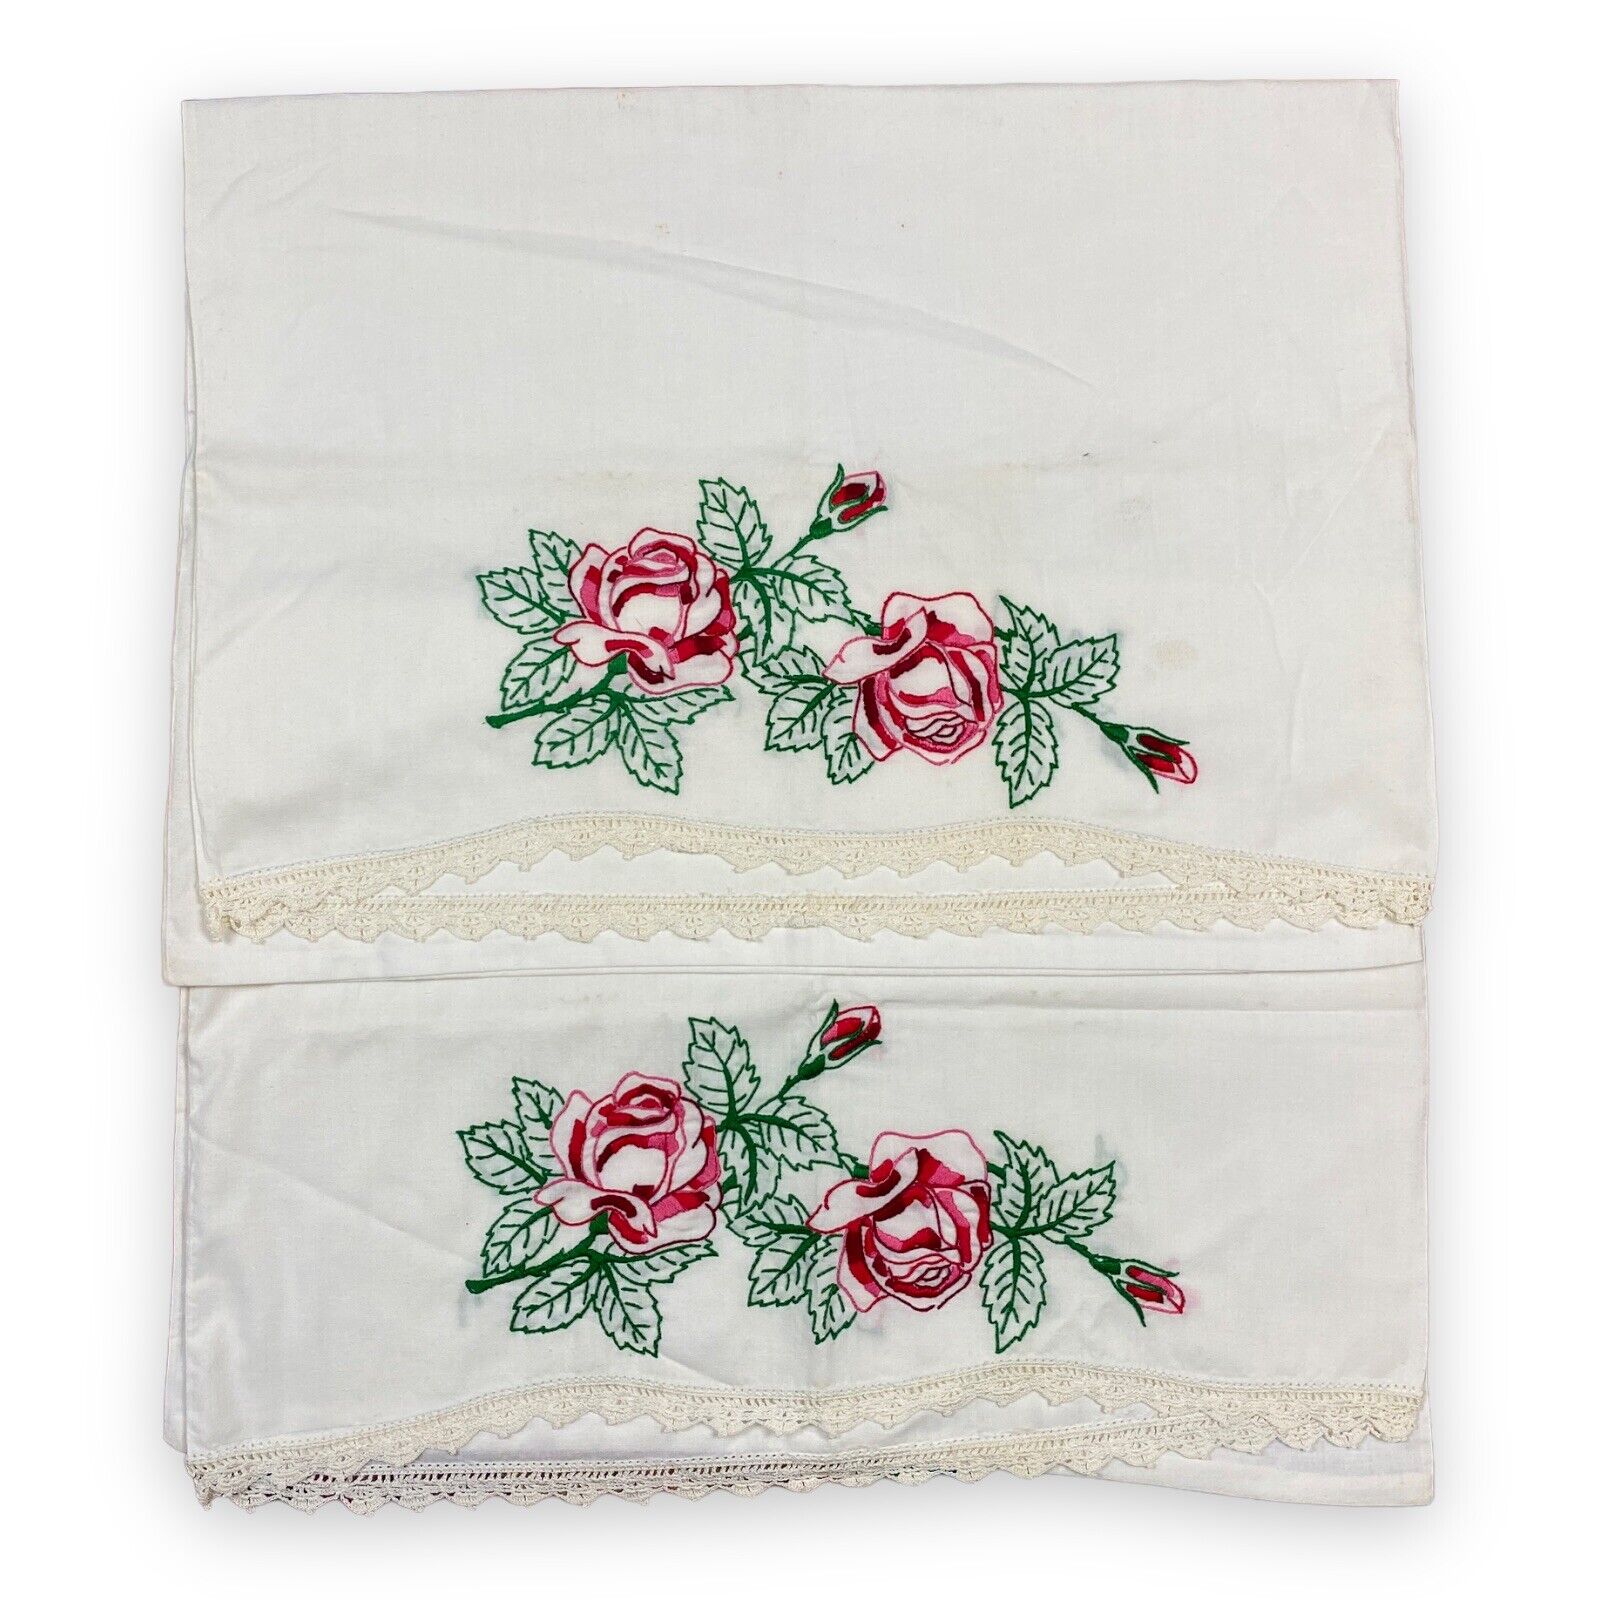 Vintage Cotton 2 Pillowcases Embroidered Roses & Buds Crocheted Lace Trim